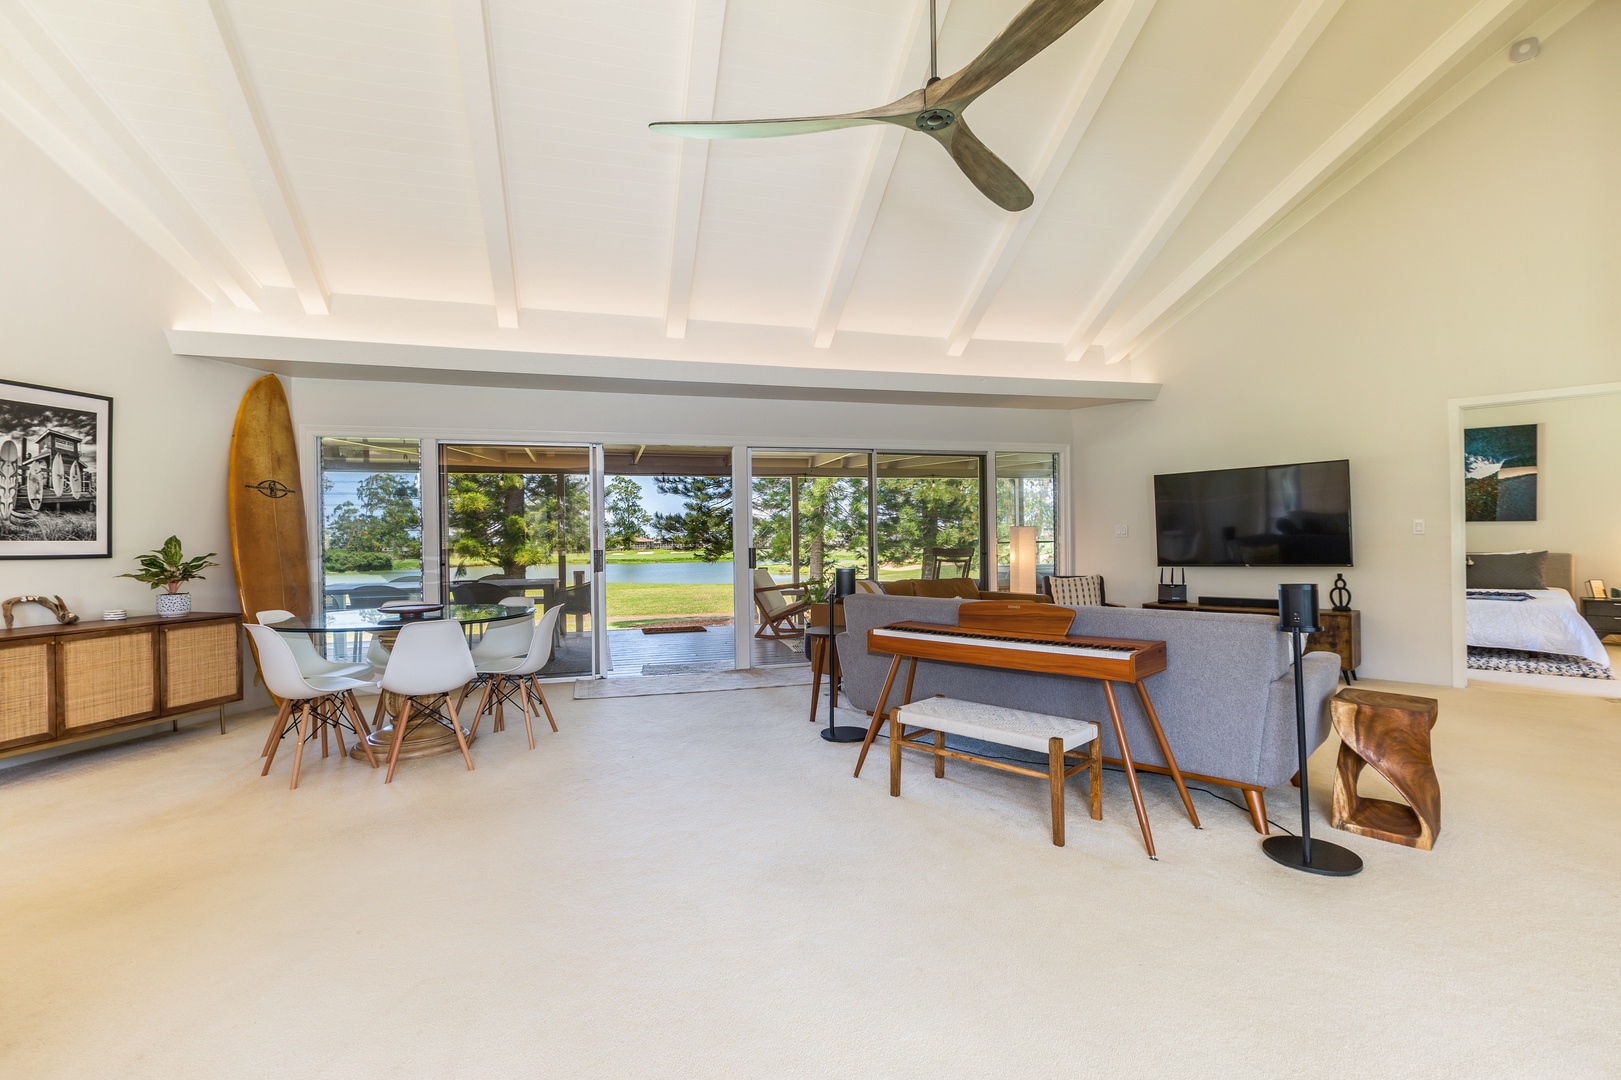 Princeville Vacation Rentals, Wai Puna - Expansive, comfortable living area with views through the sliding glass doors